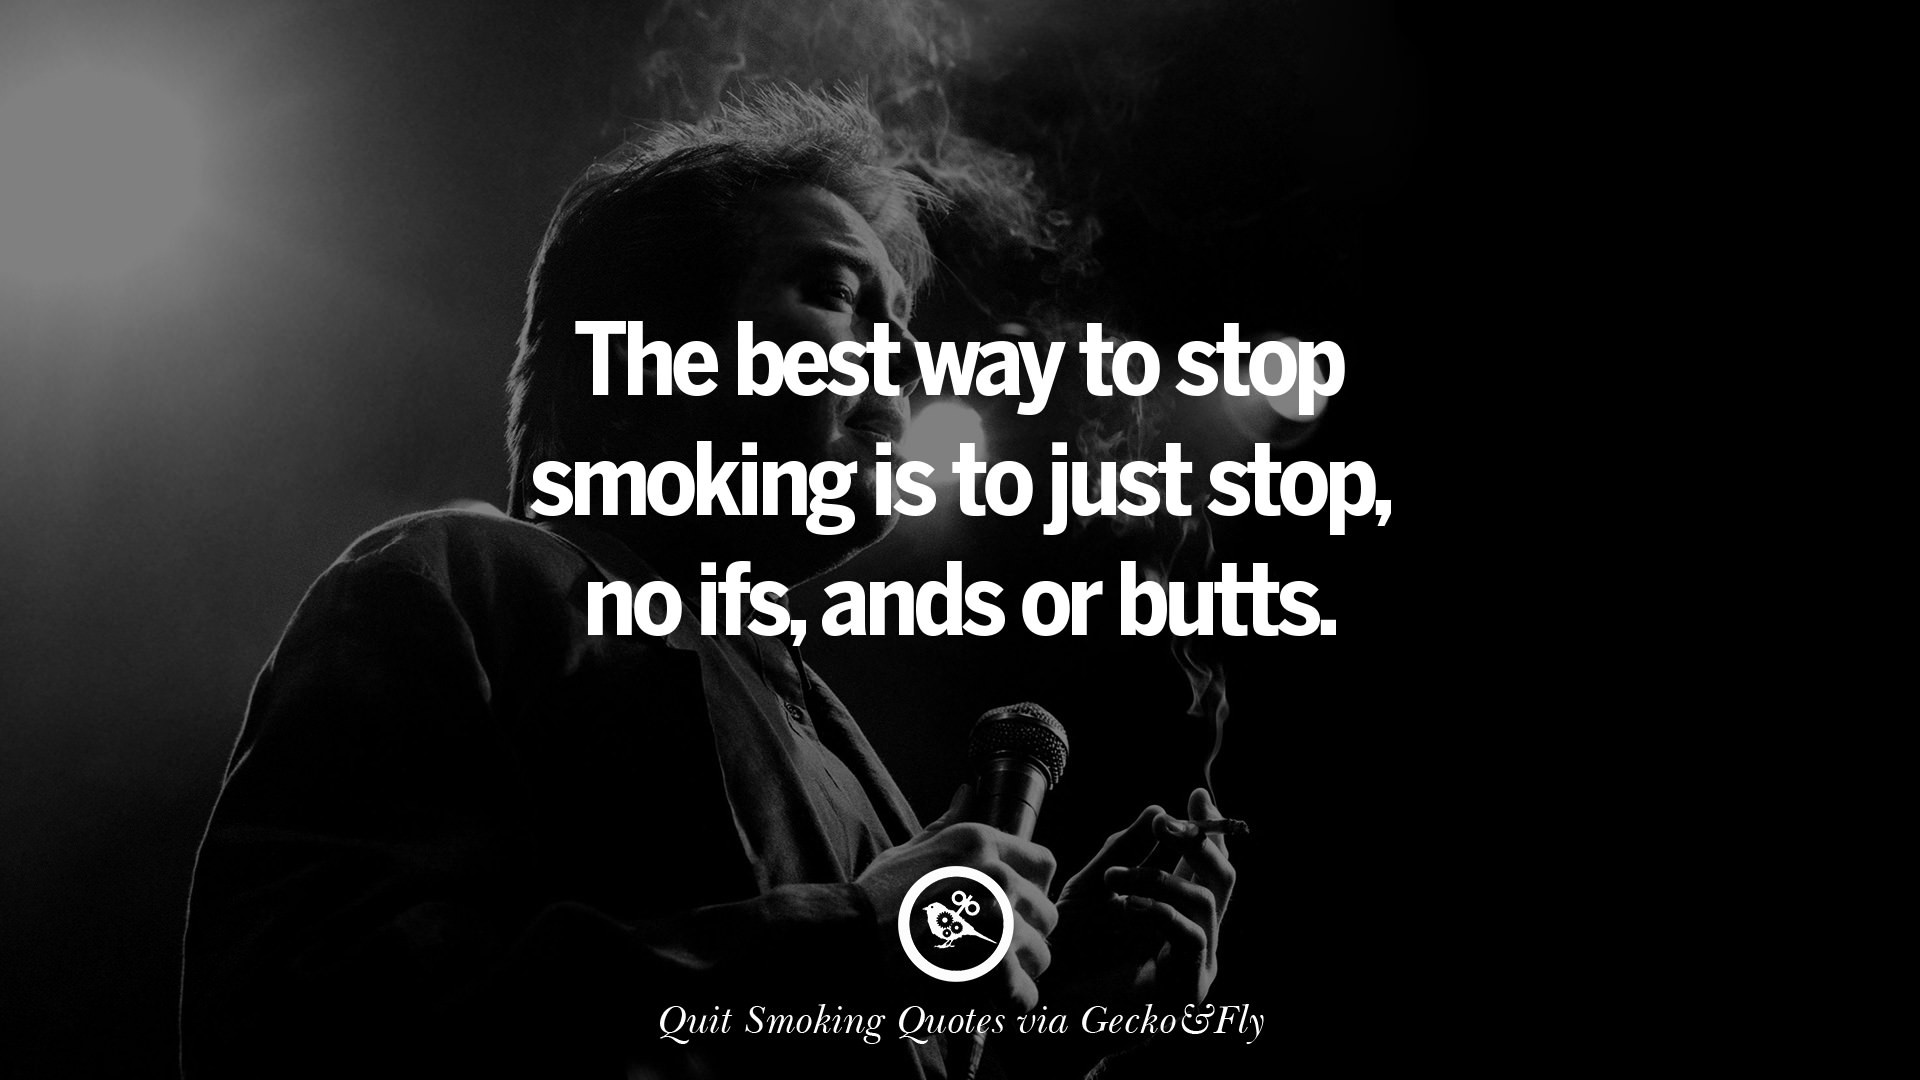 1920x1080 The best way to stop smoking is to just stop, no ifs, ands or butts.